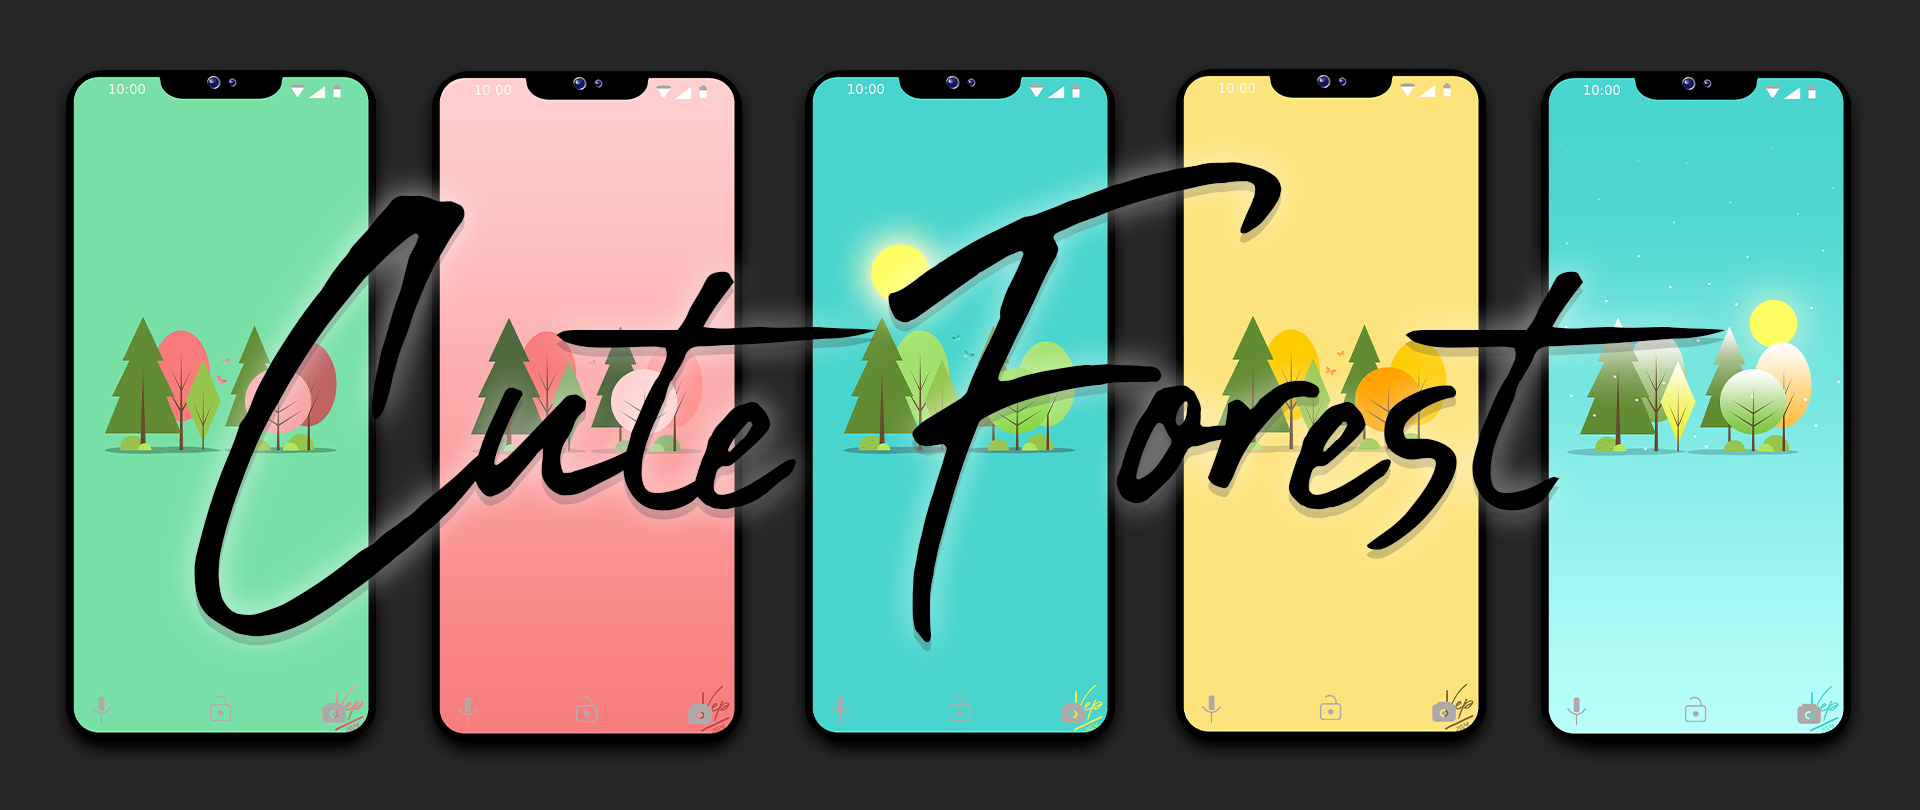 Cute Forest Wallpapers